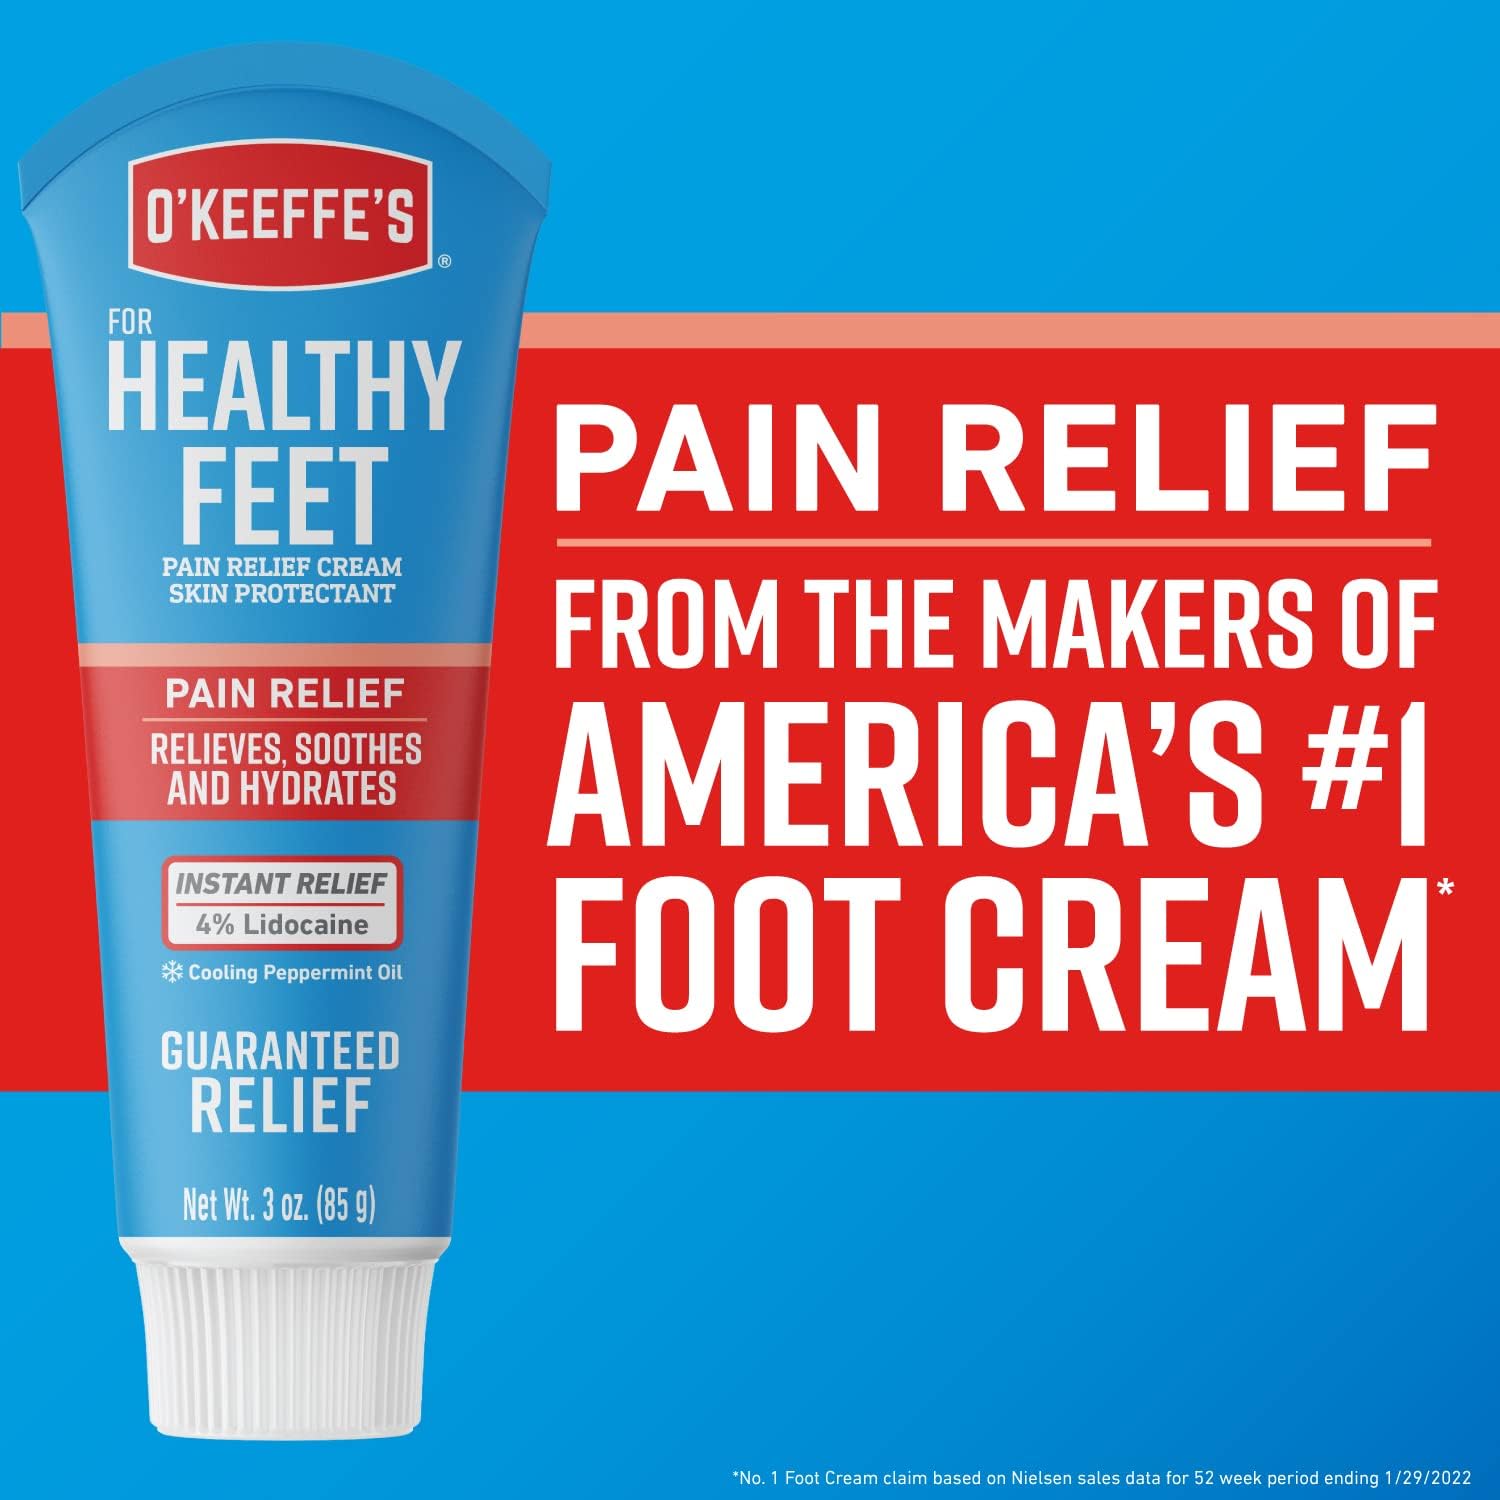 O'Keeffe's for Healthy Feet Pain Relief Skin Protectant Cream, 3 Ounce